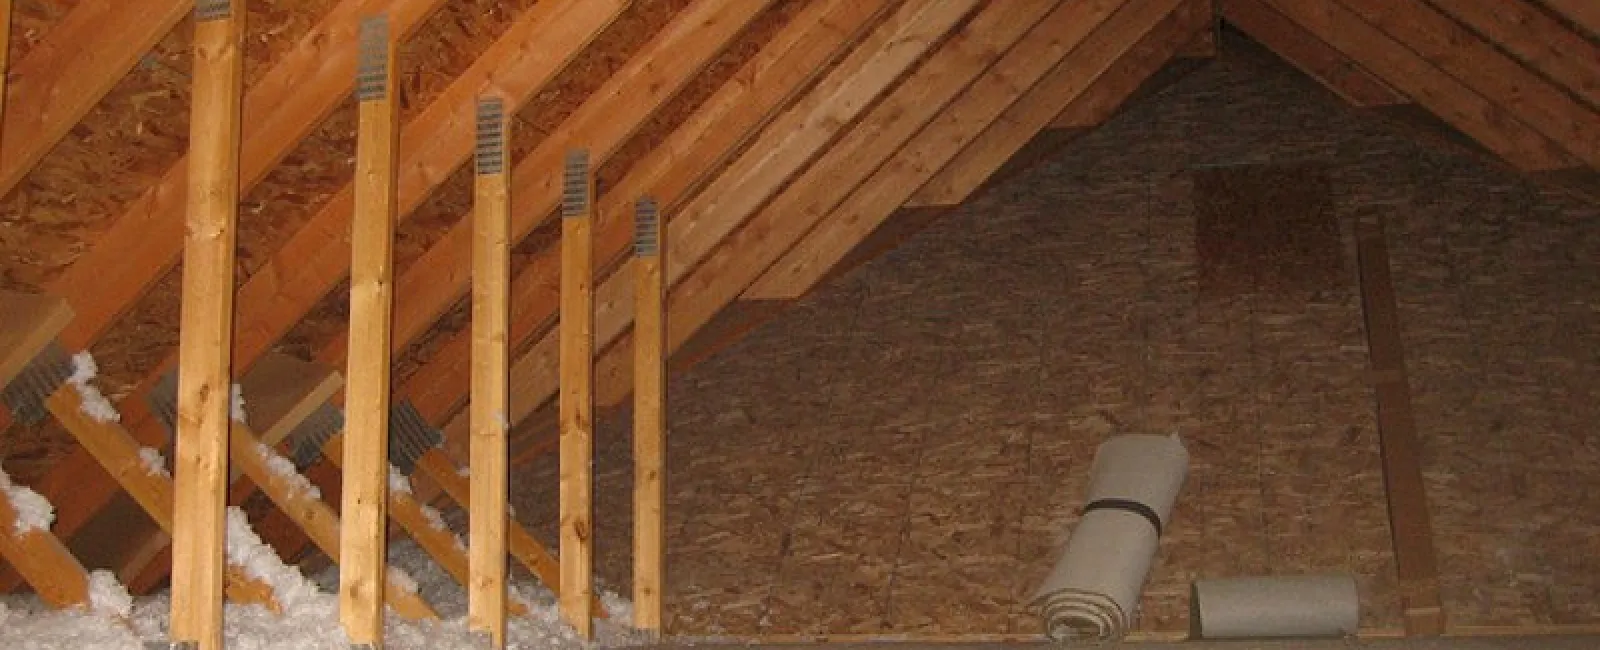 Attic Insulation May Be All You Need to Go Green